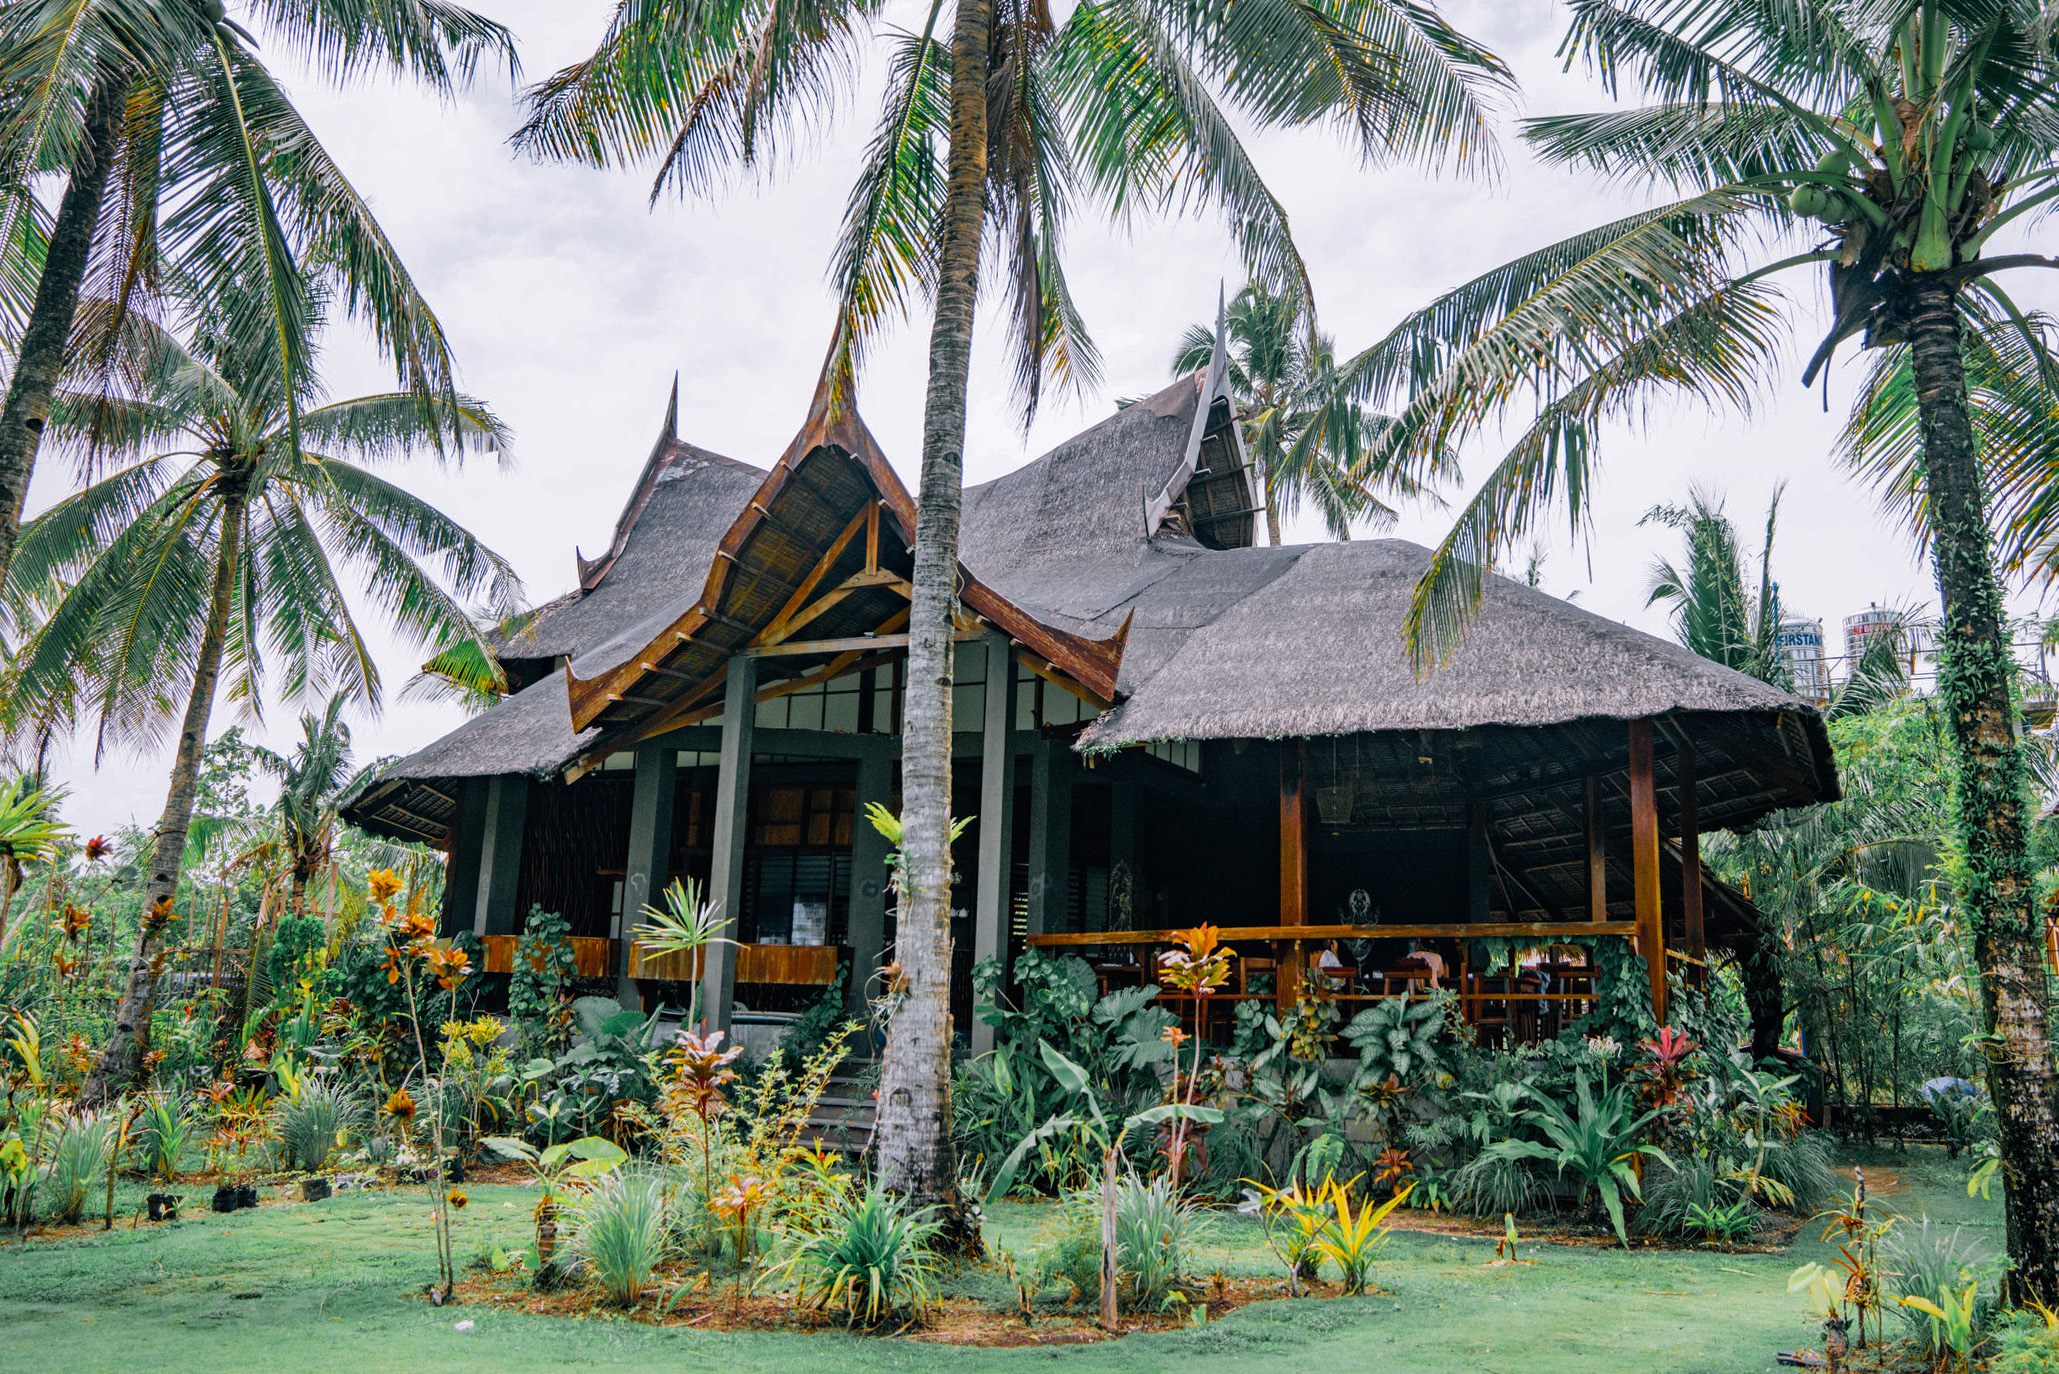 5D4N Siargao Yoga Package with Airfare | Lotus Shores Yoga Retreat from Manila + Vegan Cafe Vouchers